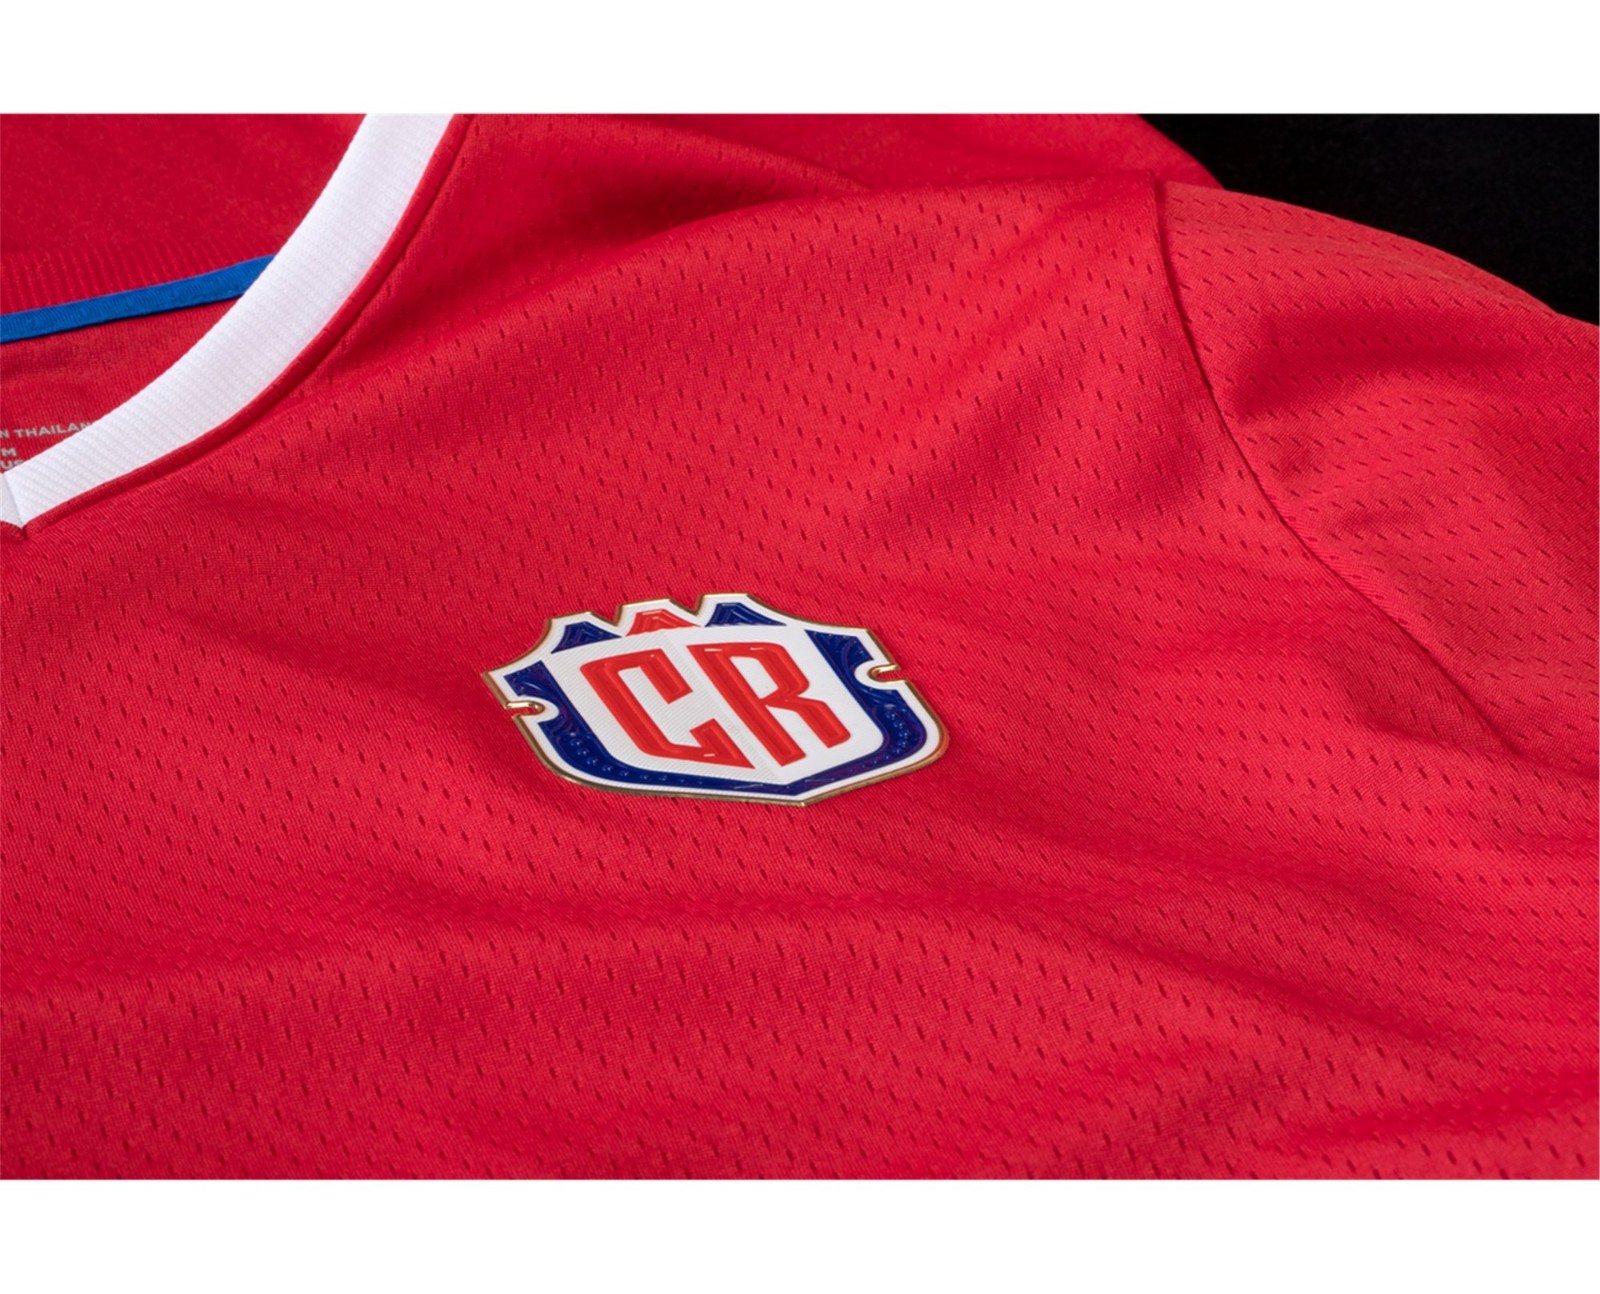 Costa Rica World Cup 2022 Home Kit Club Badge